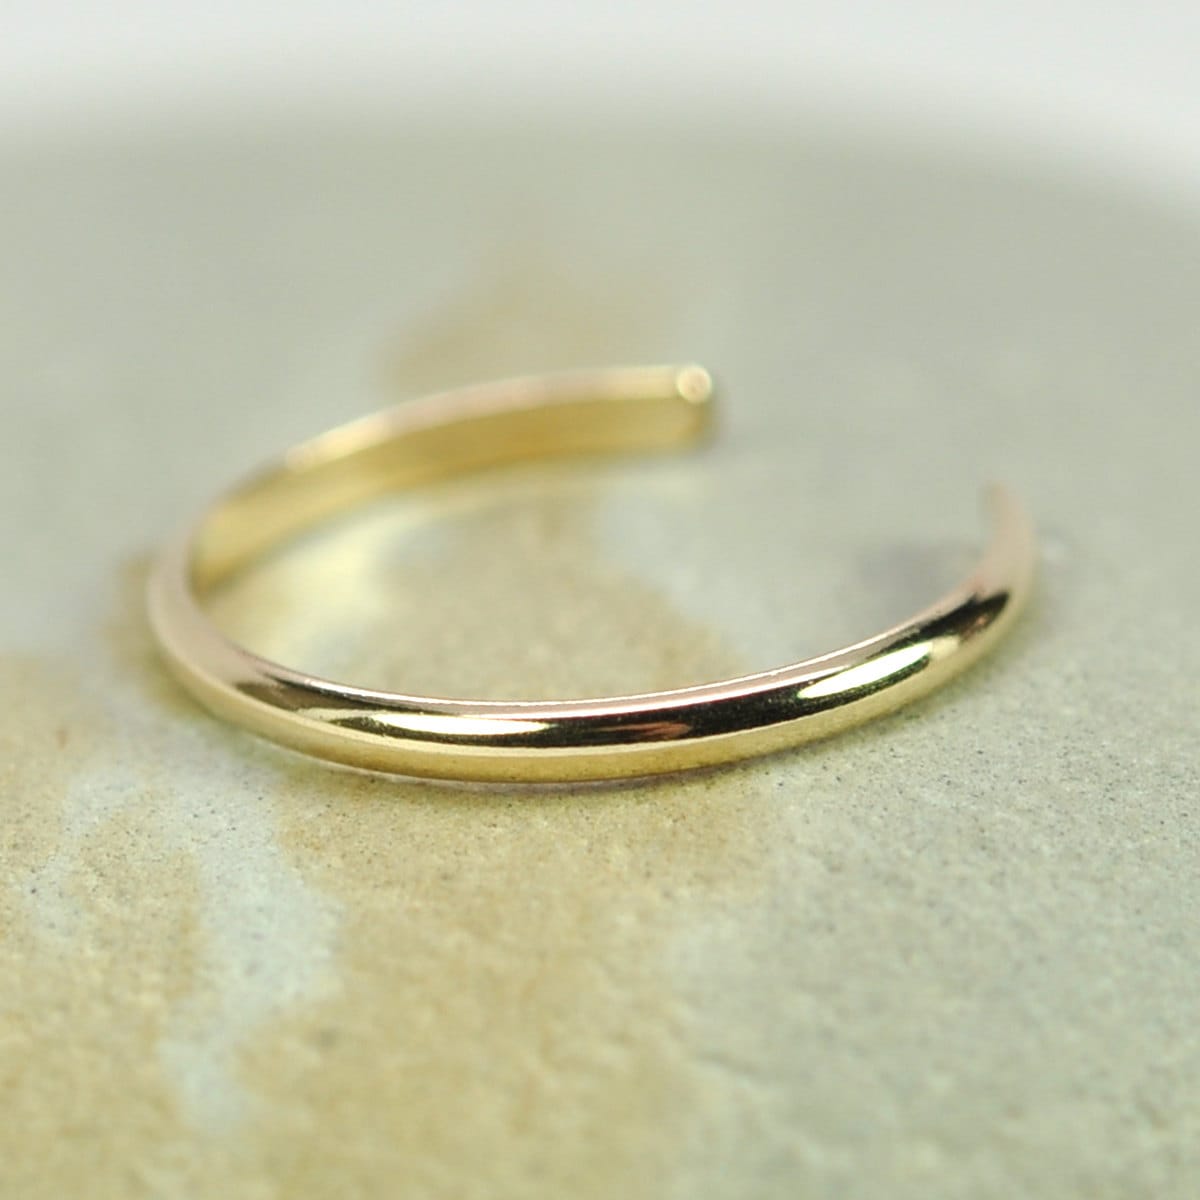 Gold Toe Ring 14K Yellow Gold fill Half Round Adjustable